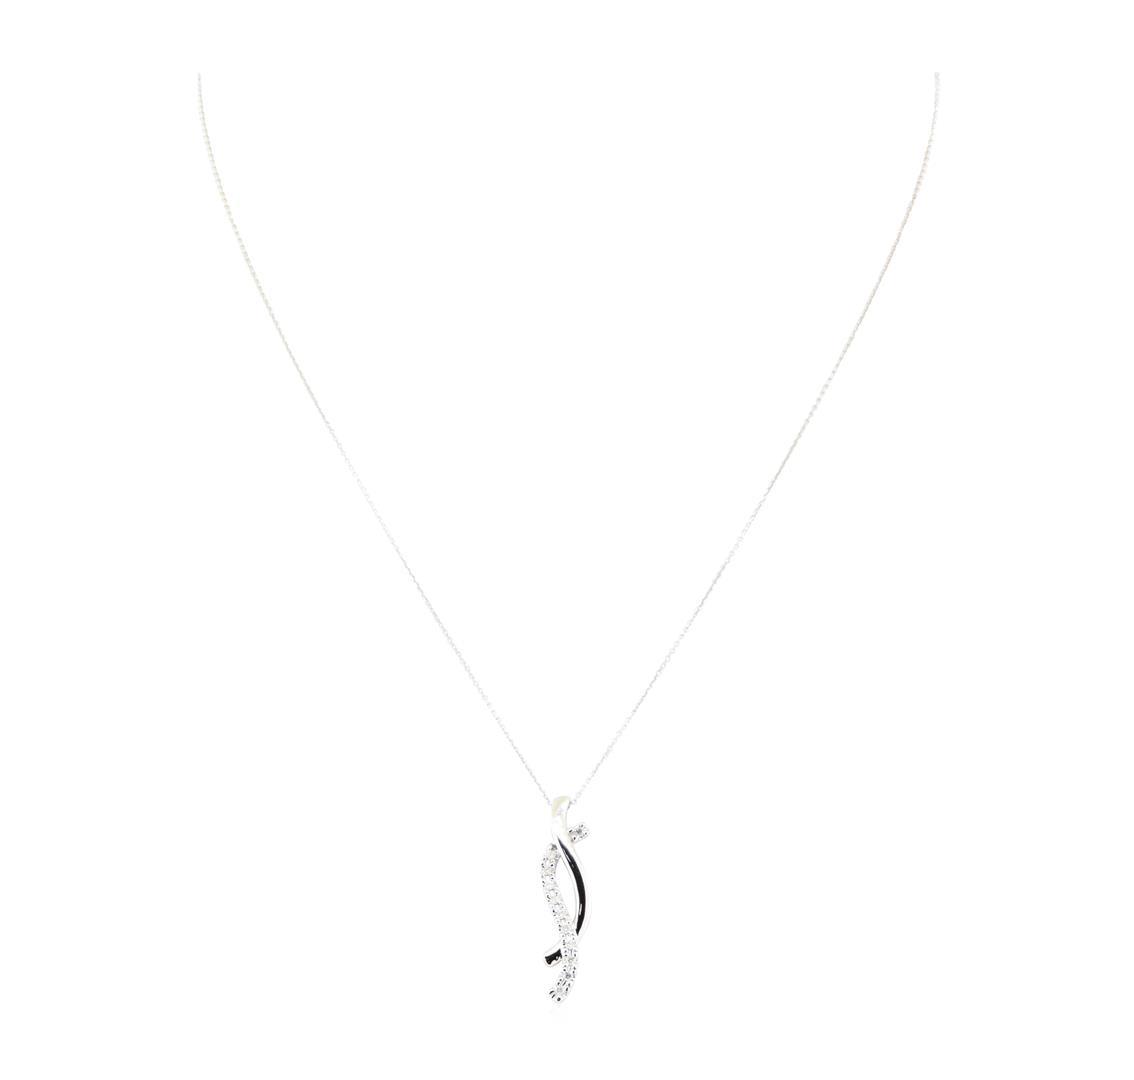 0.13 ctw Diamond Double Journey Pendant with Chain - 14KT White Gold